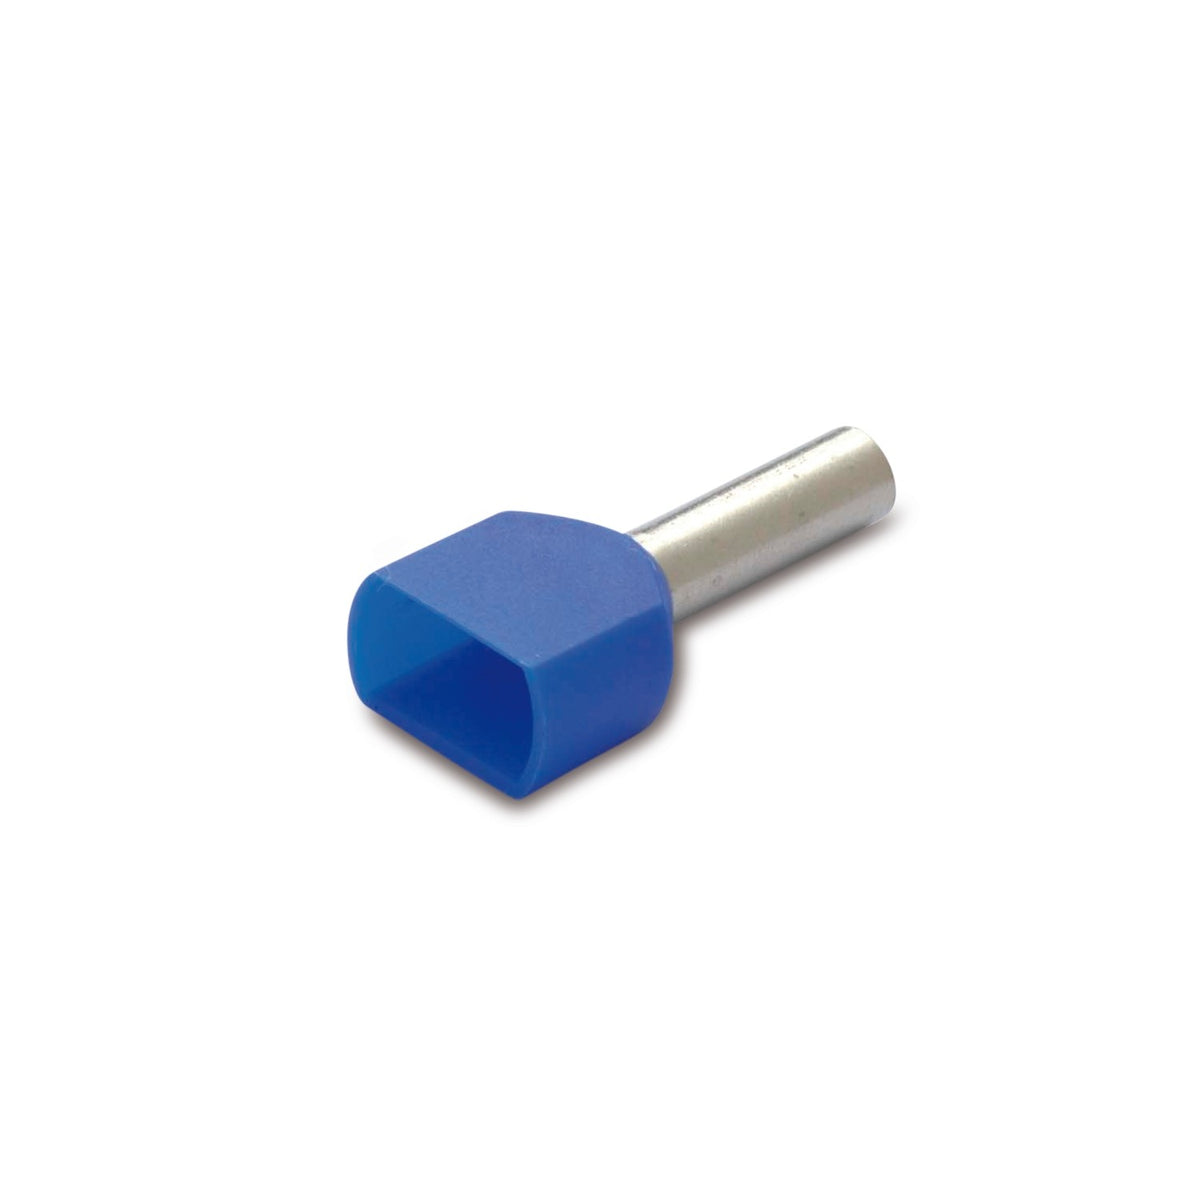 Double blue cable bootlace ferrule